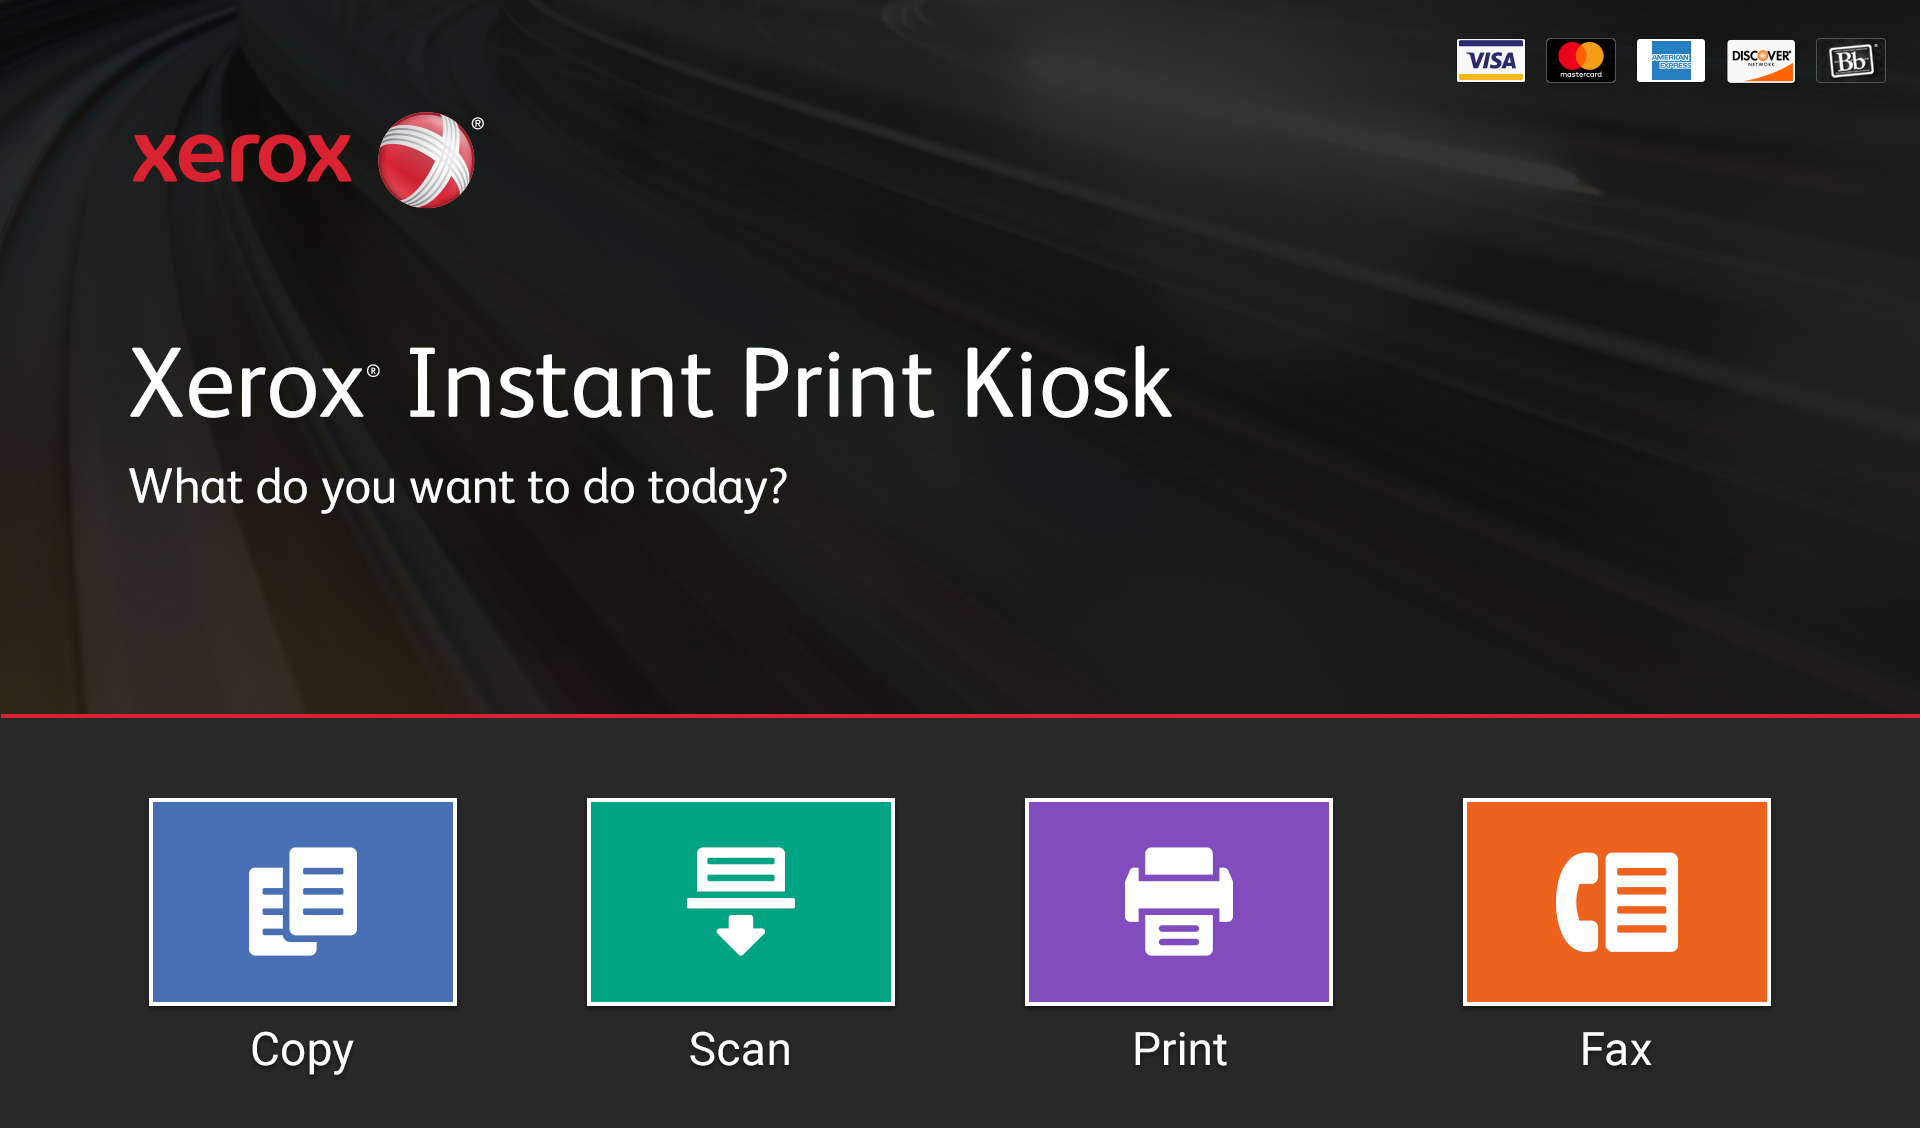 Xerox Unveils Instant Print Kiosk for Mobile Printing